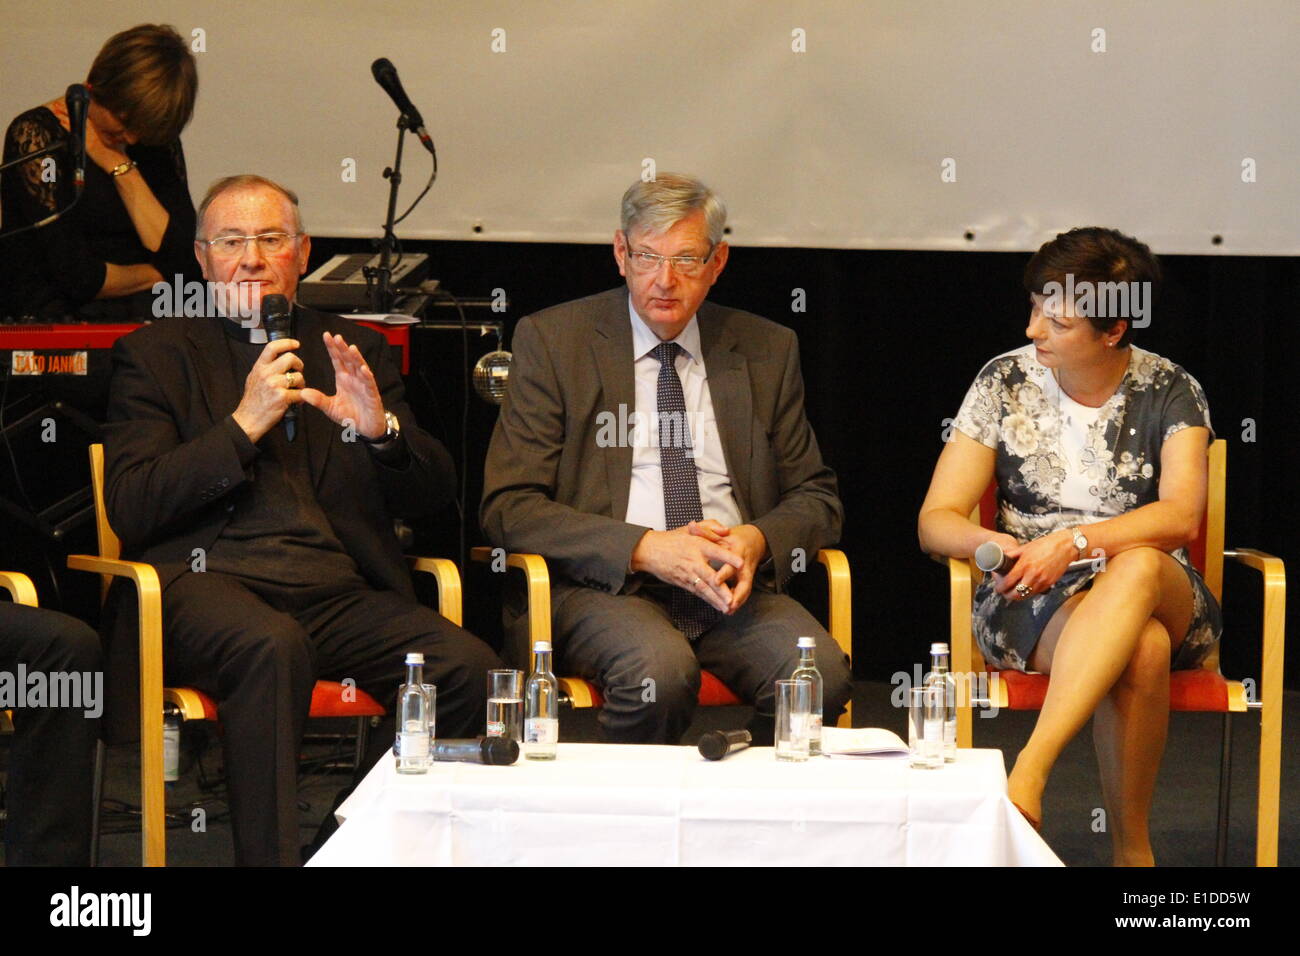 REGENSBURG, GERMANY- MAY 31: The Auxiliary bishop of Munich and Freising, Bernhard Ha§lberger (left), is pictured together with Regina Dolores Stieler-Hinz (right), the chairwoman of the Katholische Arbeitnehmer-Bewegung (Catholic Workers Movement) , at a panel discussion about Catholic associations at the 99th Deutscher Katholikentag (German Catholic Church Congress). The German Minister of the Interior Thomas de Maiziere visited the 99th Deutscher Katholikentag (German Catholic Church Congress) on day 2. He took part in a panel discussion about Catholic associations. (Photo by Michael Debets Stock Photo